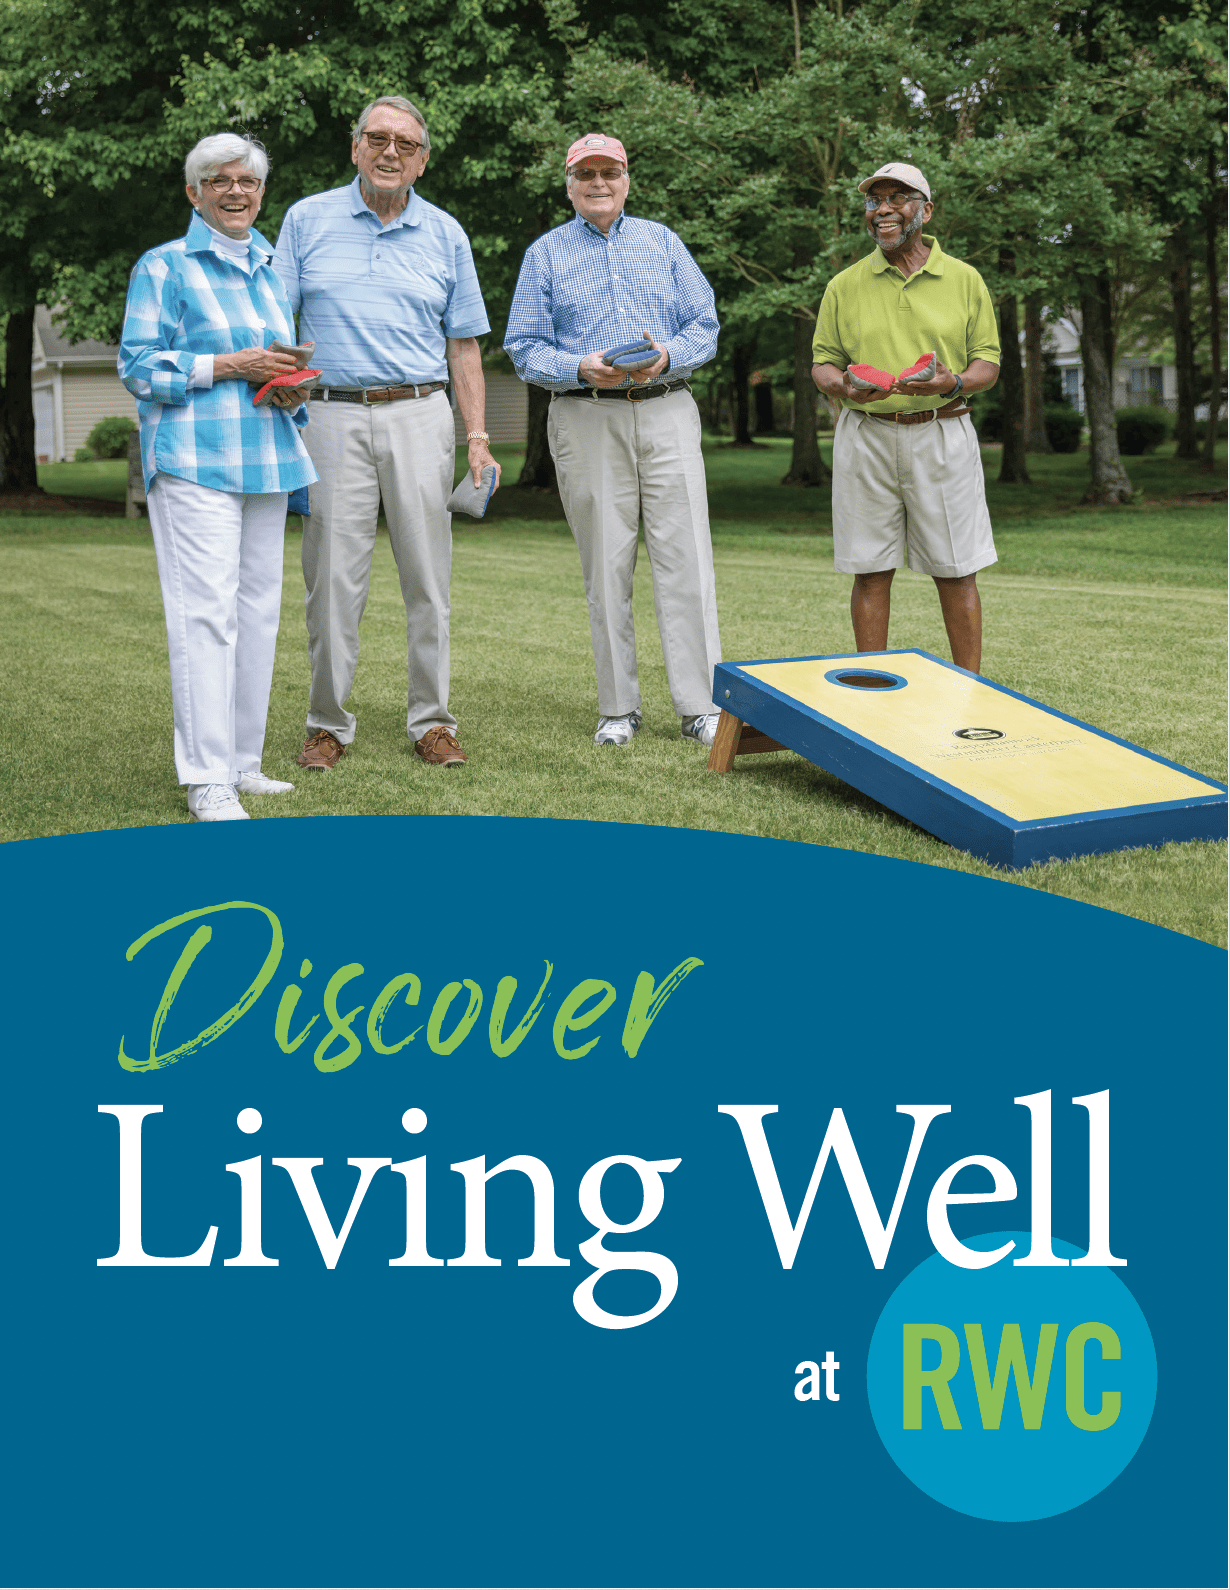 RW-C Memory Care Small House Brochure Cover